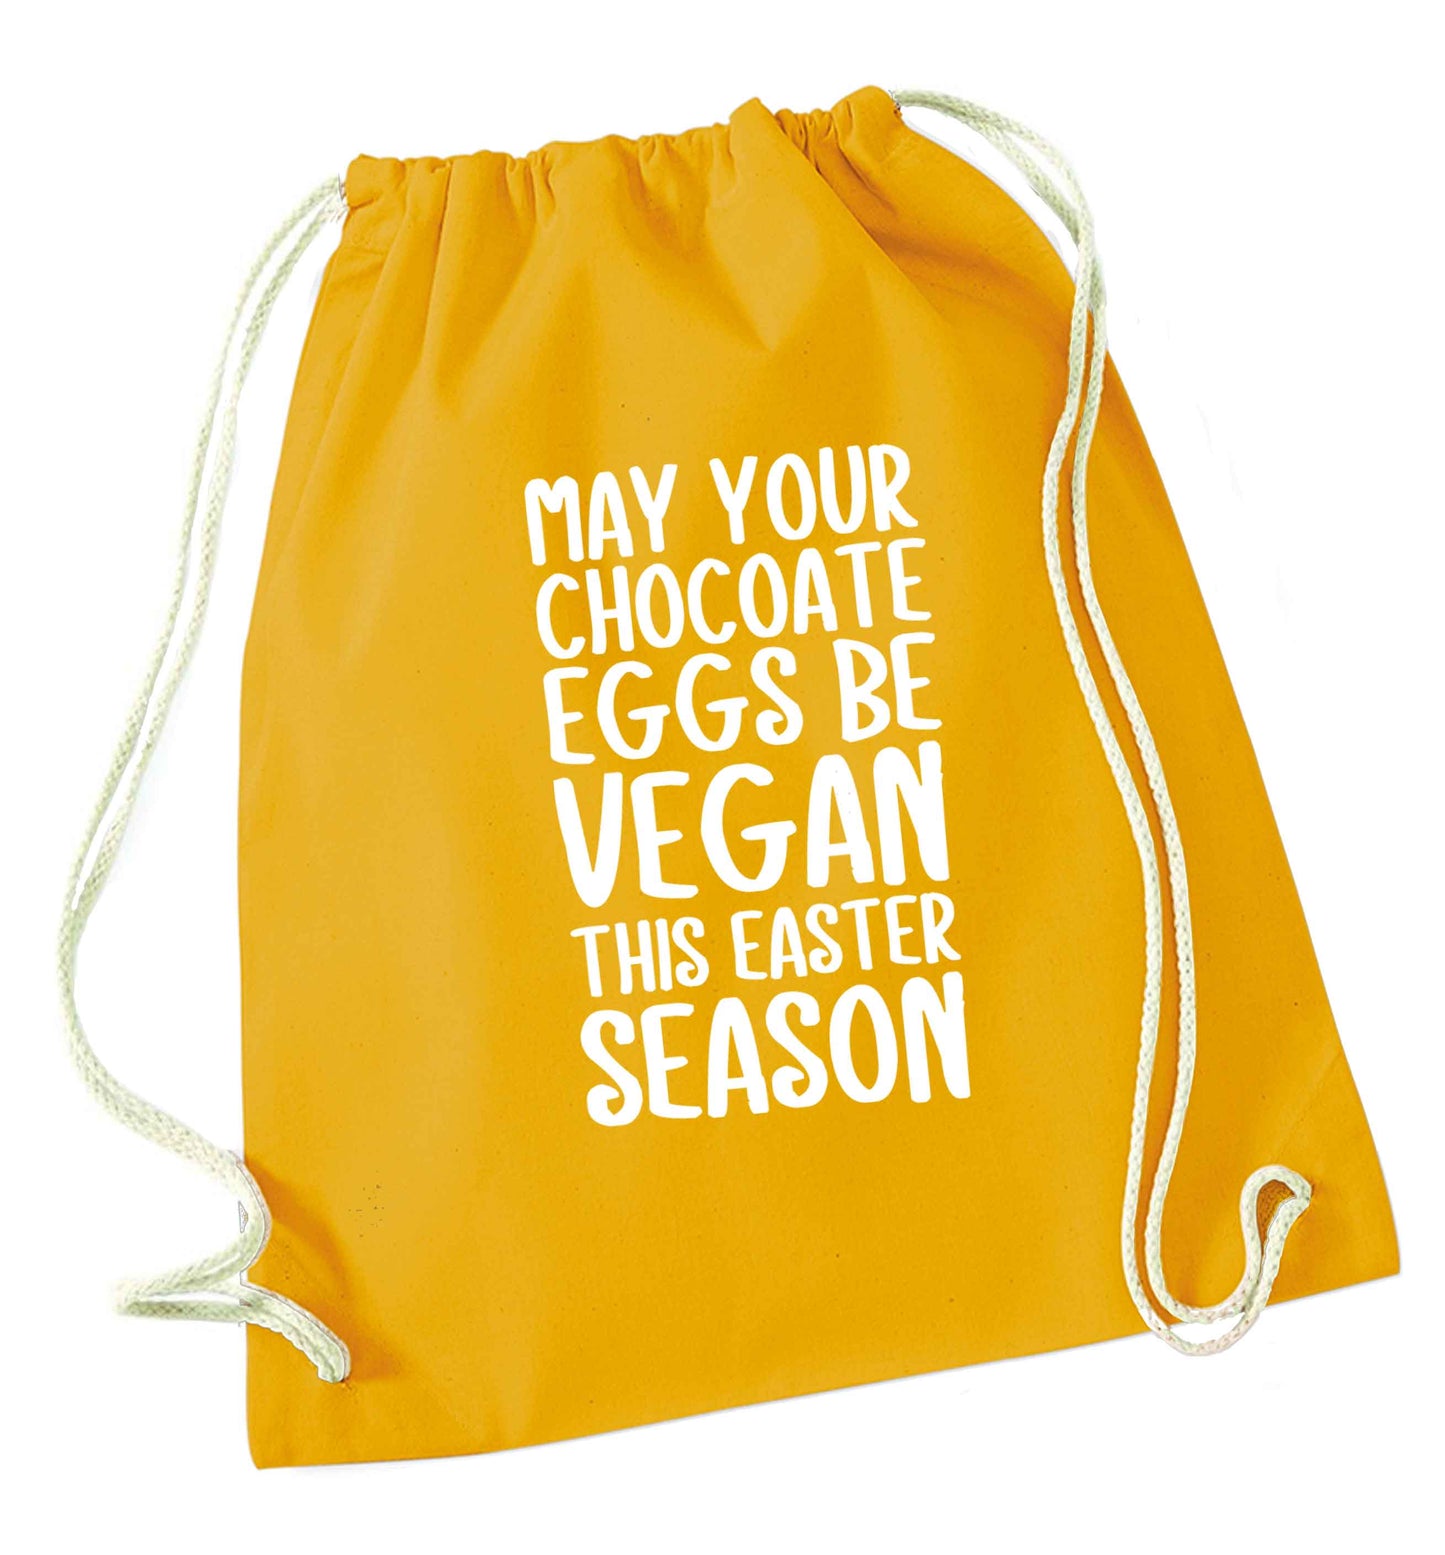 Easter bunny approved! Vegans will love this easter themed mustard drawstring bag